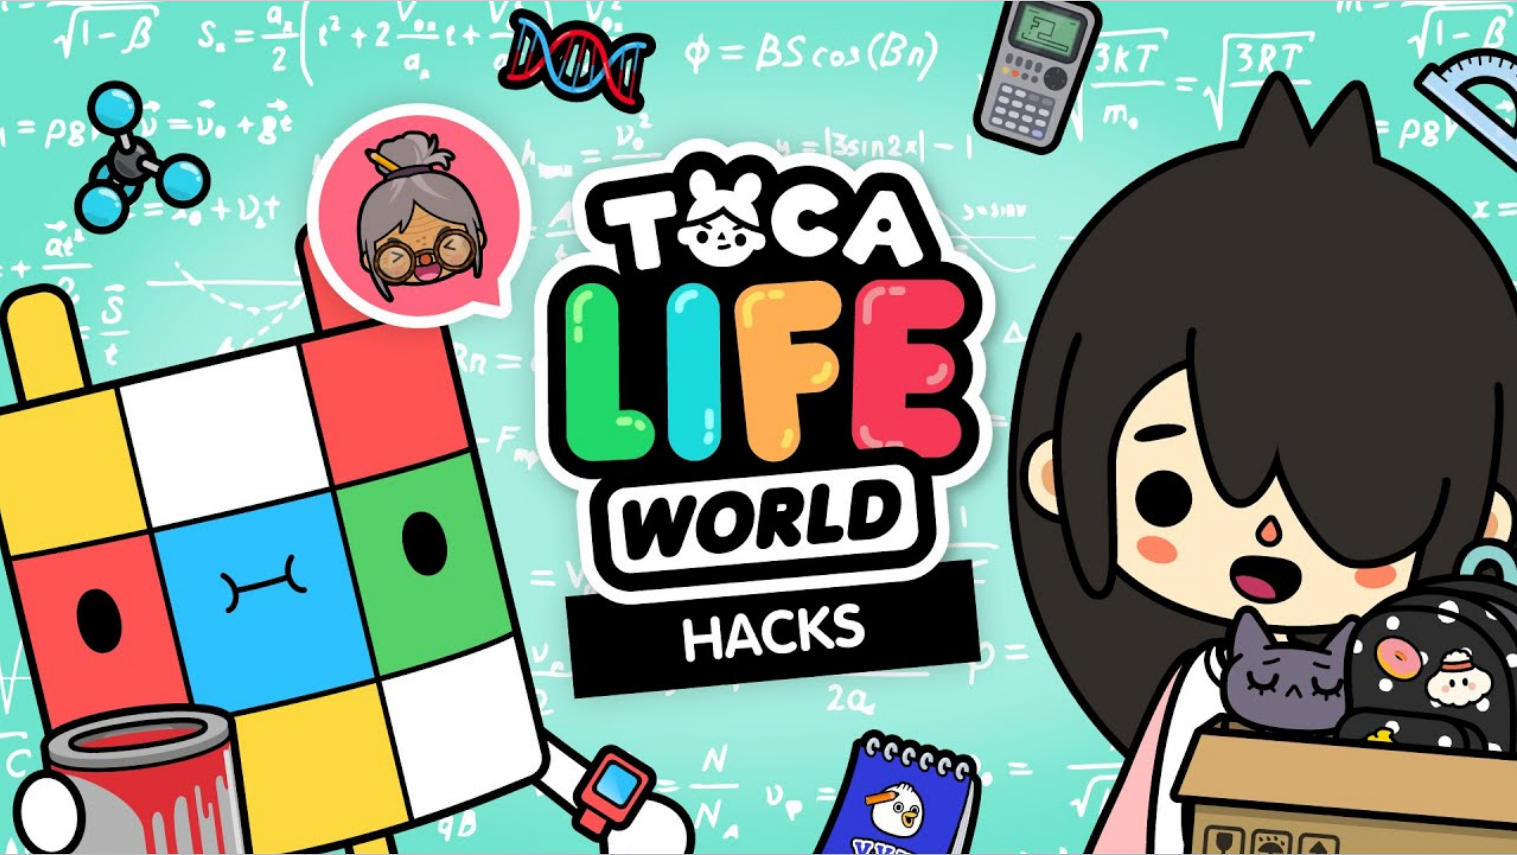 Toca Life World Hack on iOS For Free